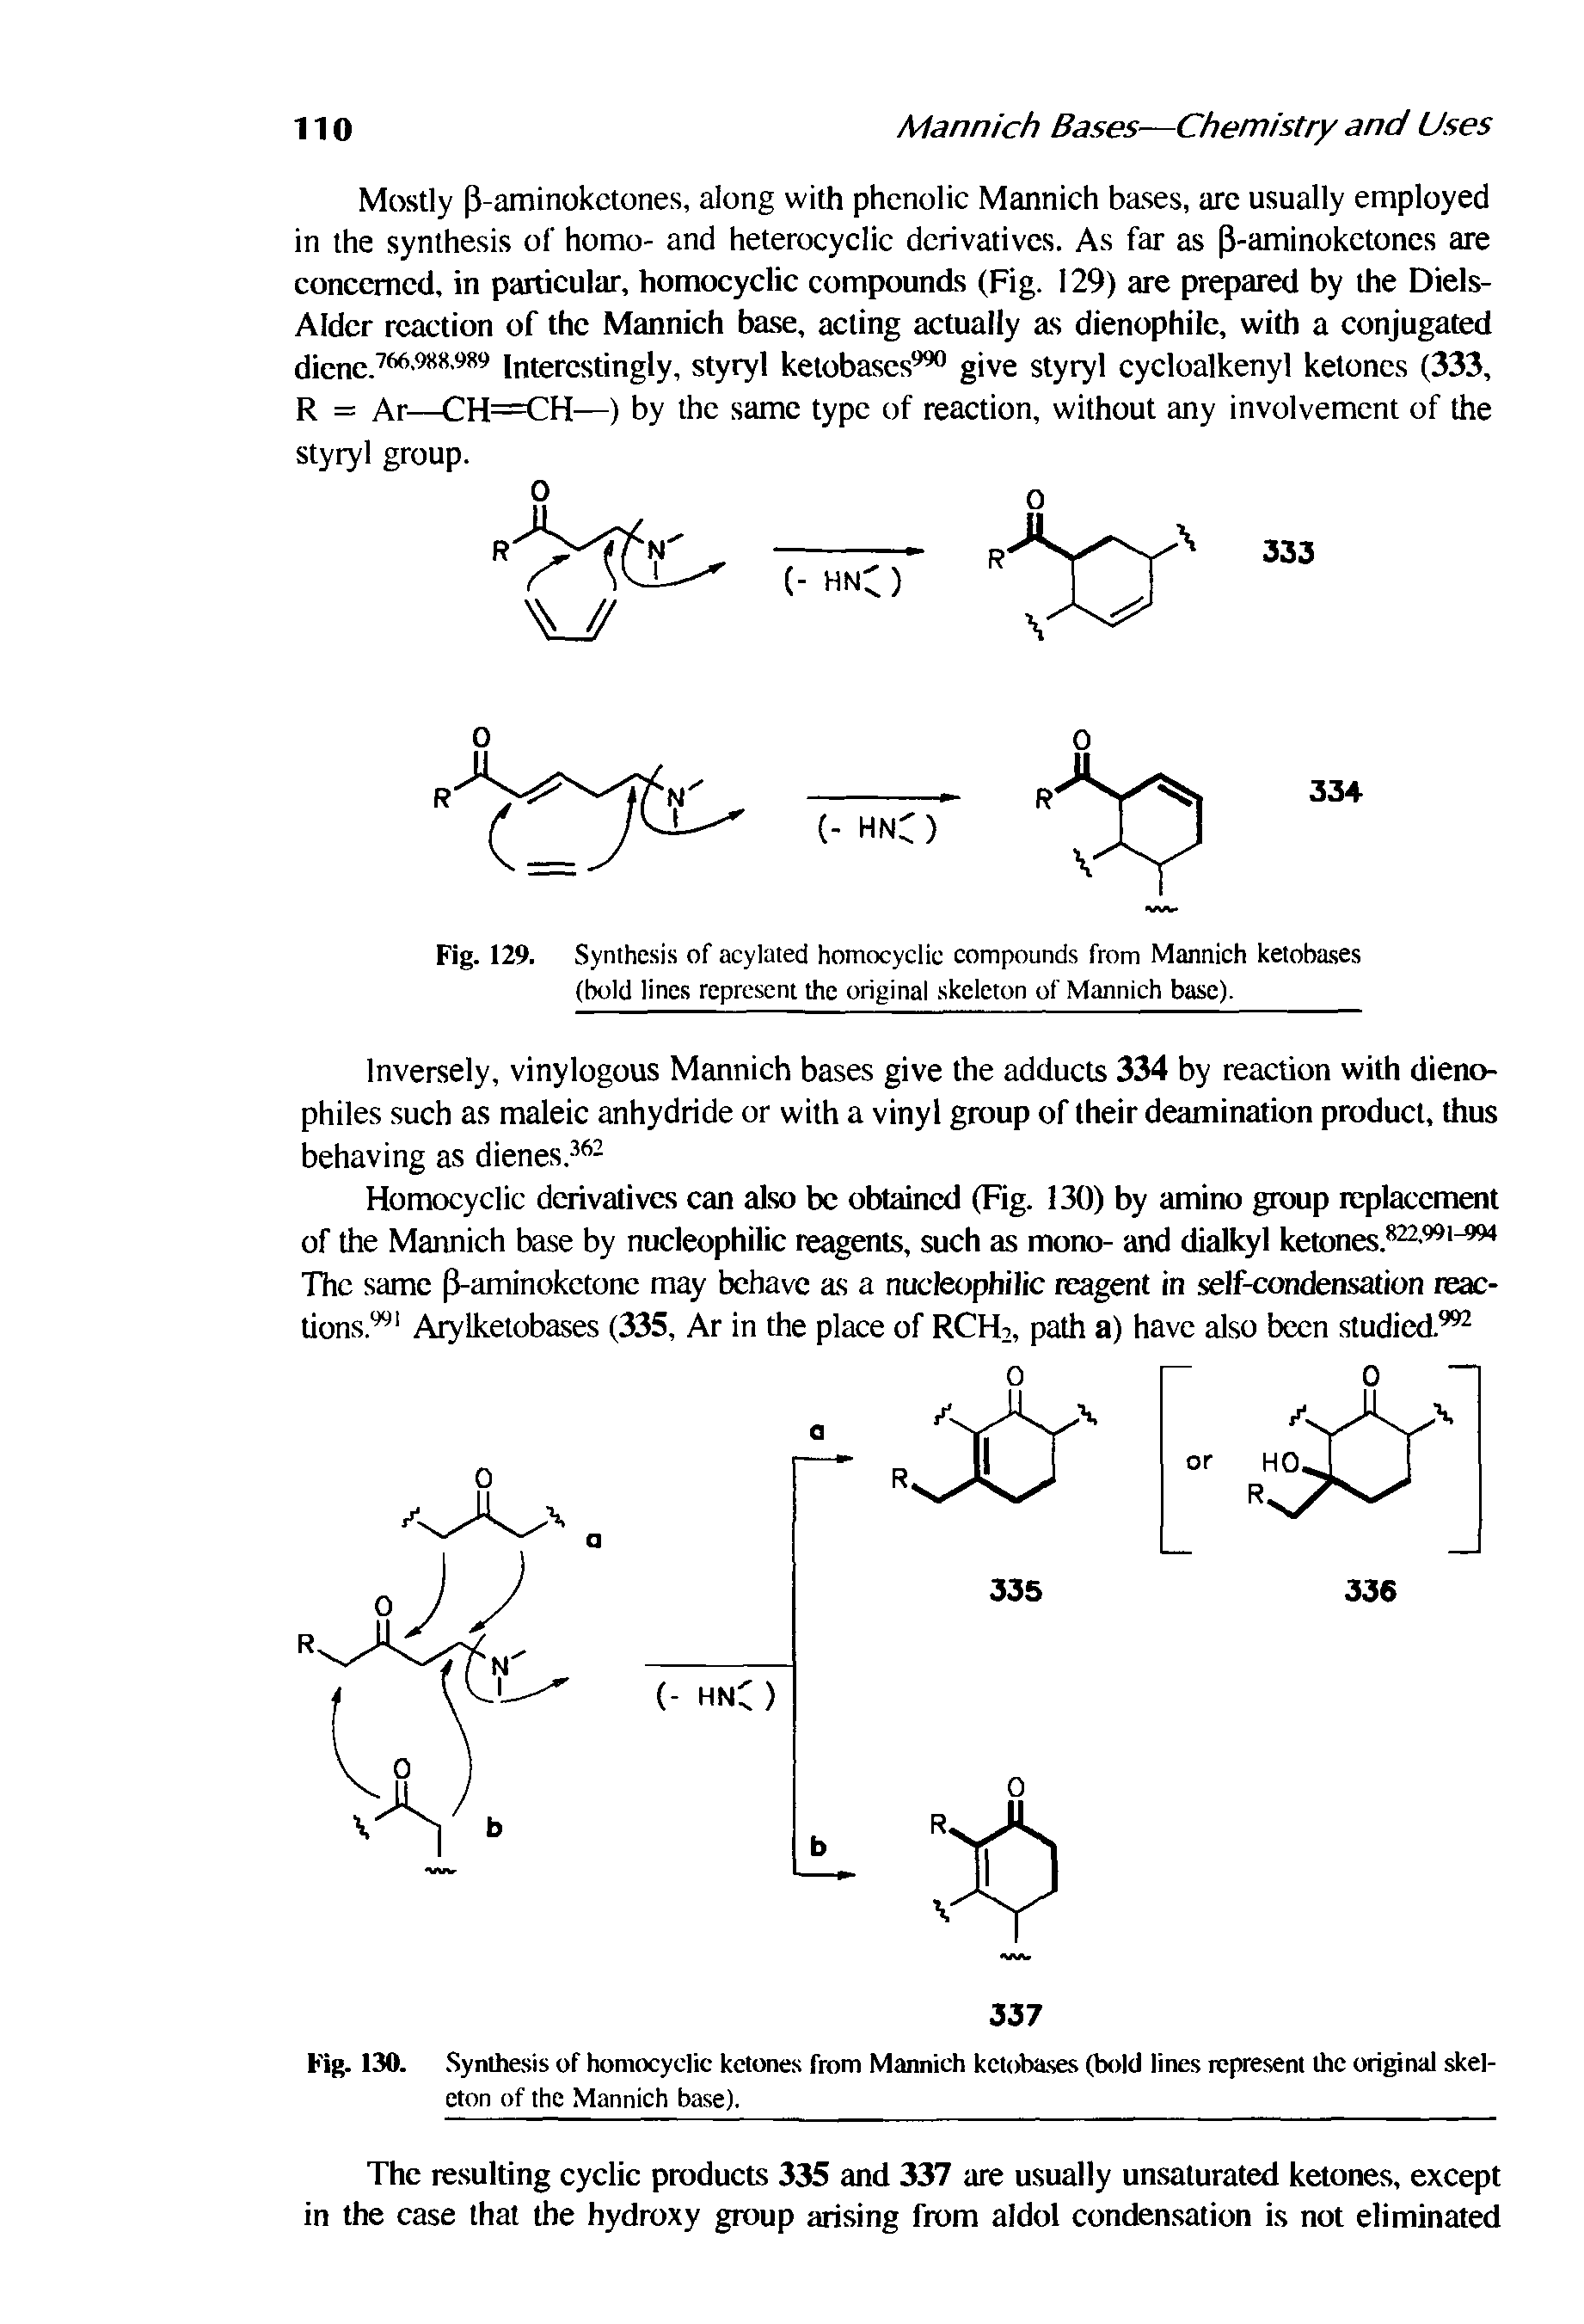 Fig. 129. Synthesis of acylated homocyclic compounds from Mannich ketoba.ses (bold lines represent the original skeleton of Mannich base).